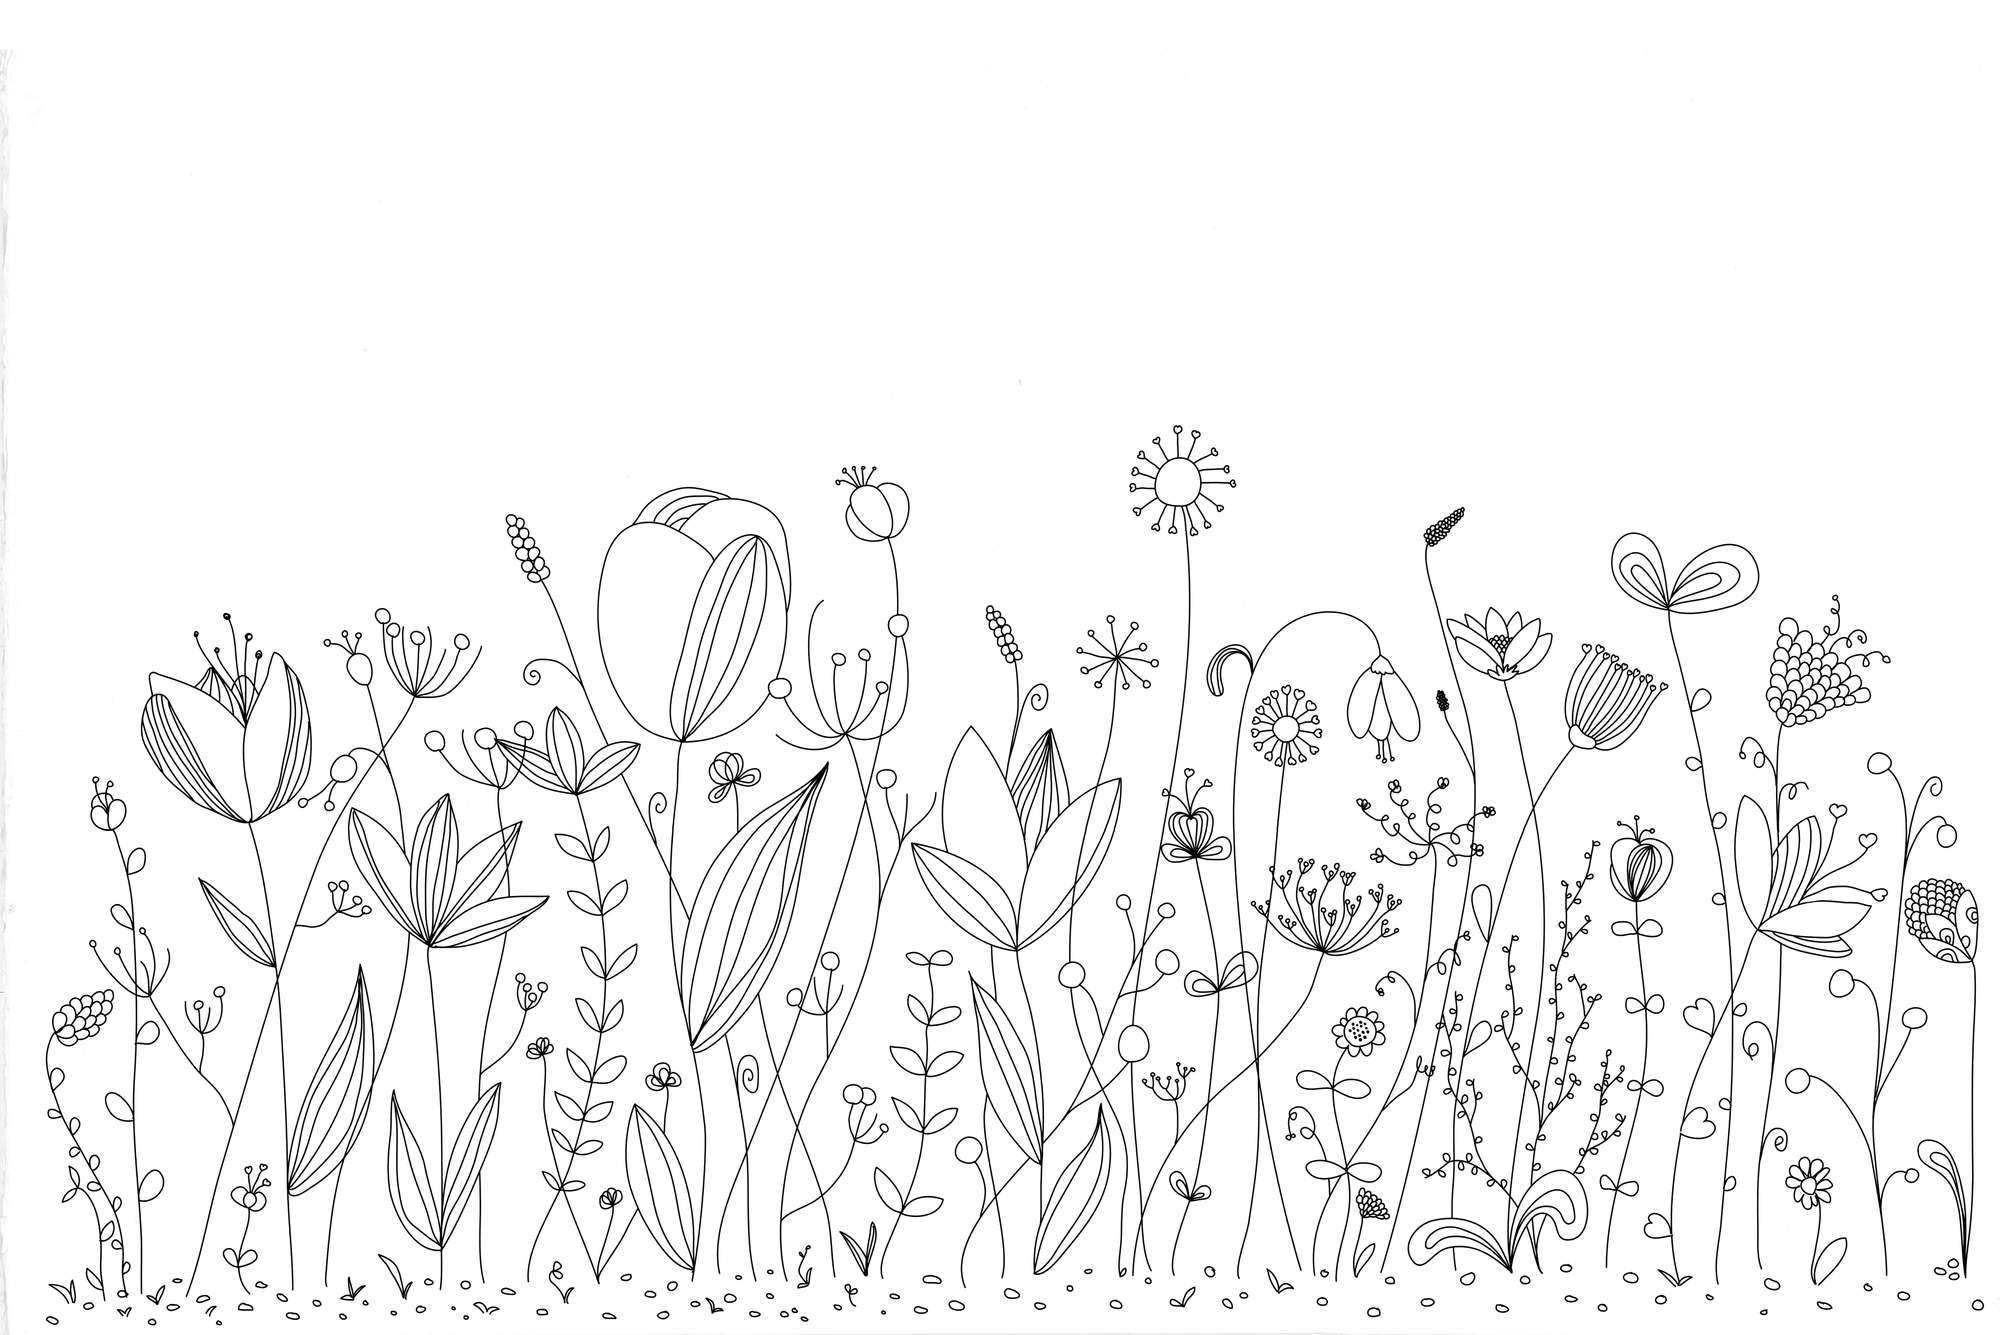             Kids mural with black and white drawn flowers on premium smooth vinyl
        